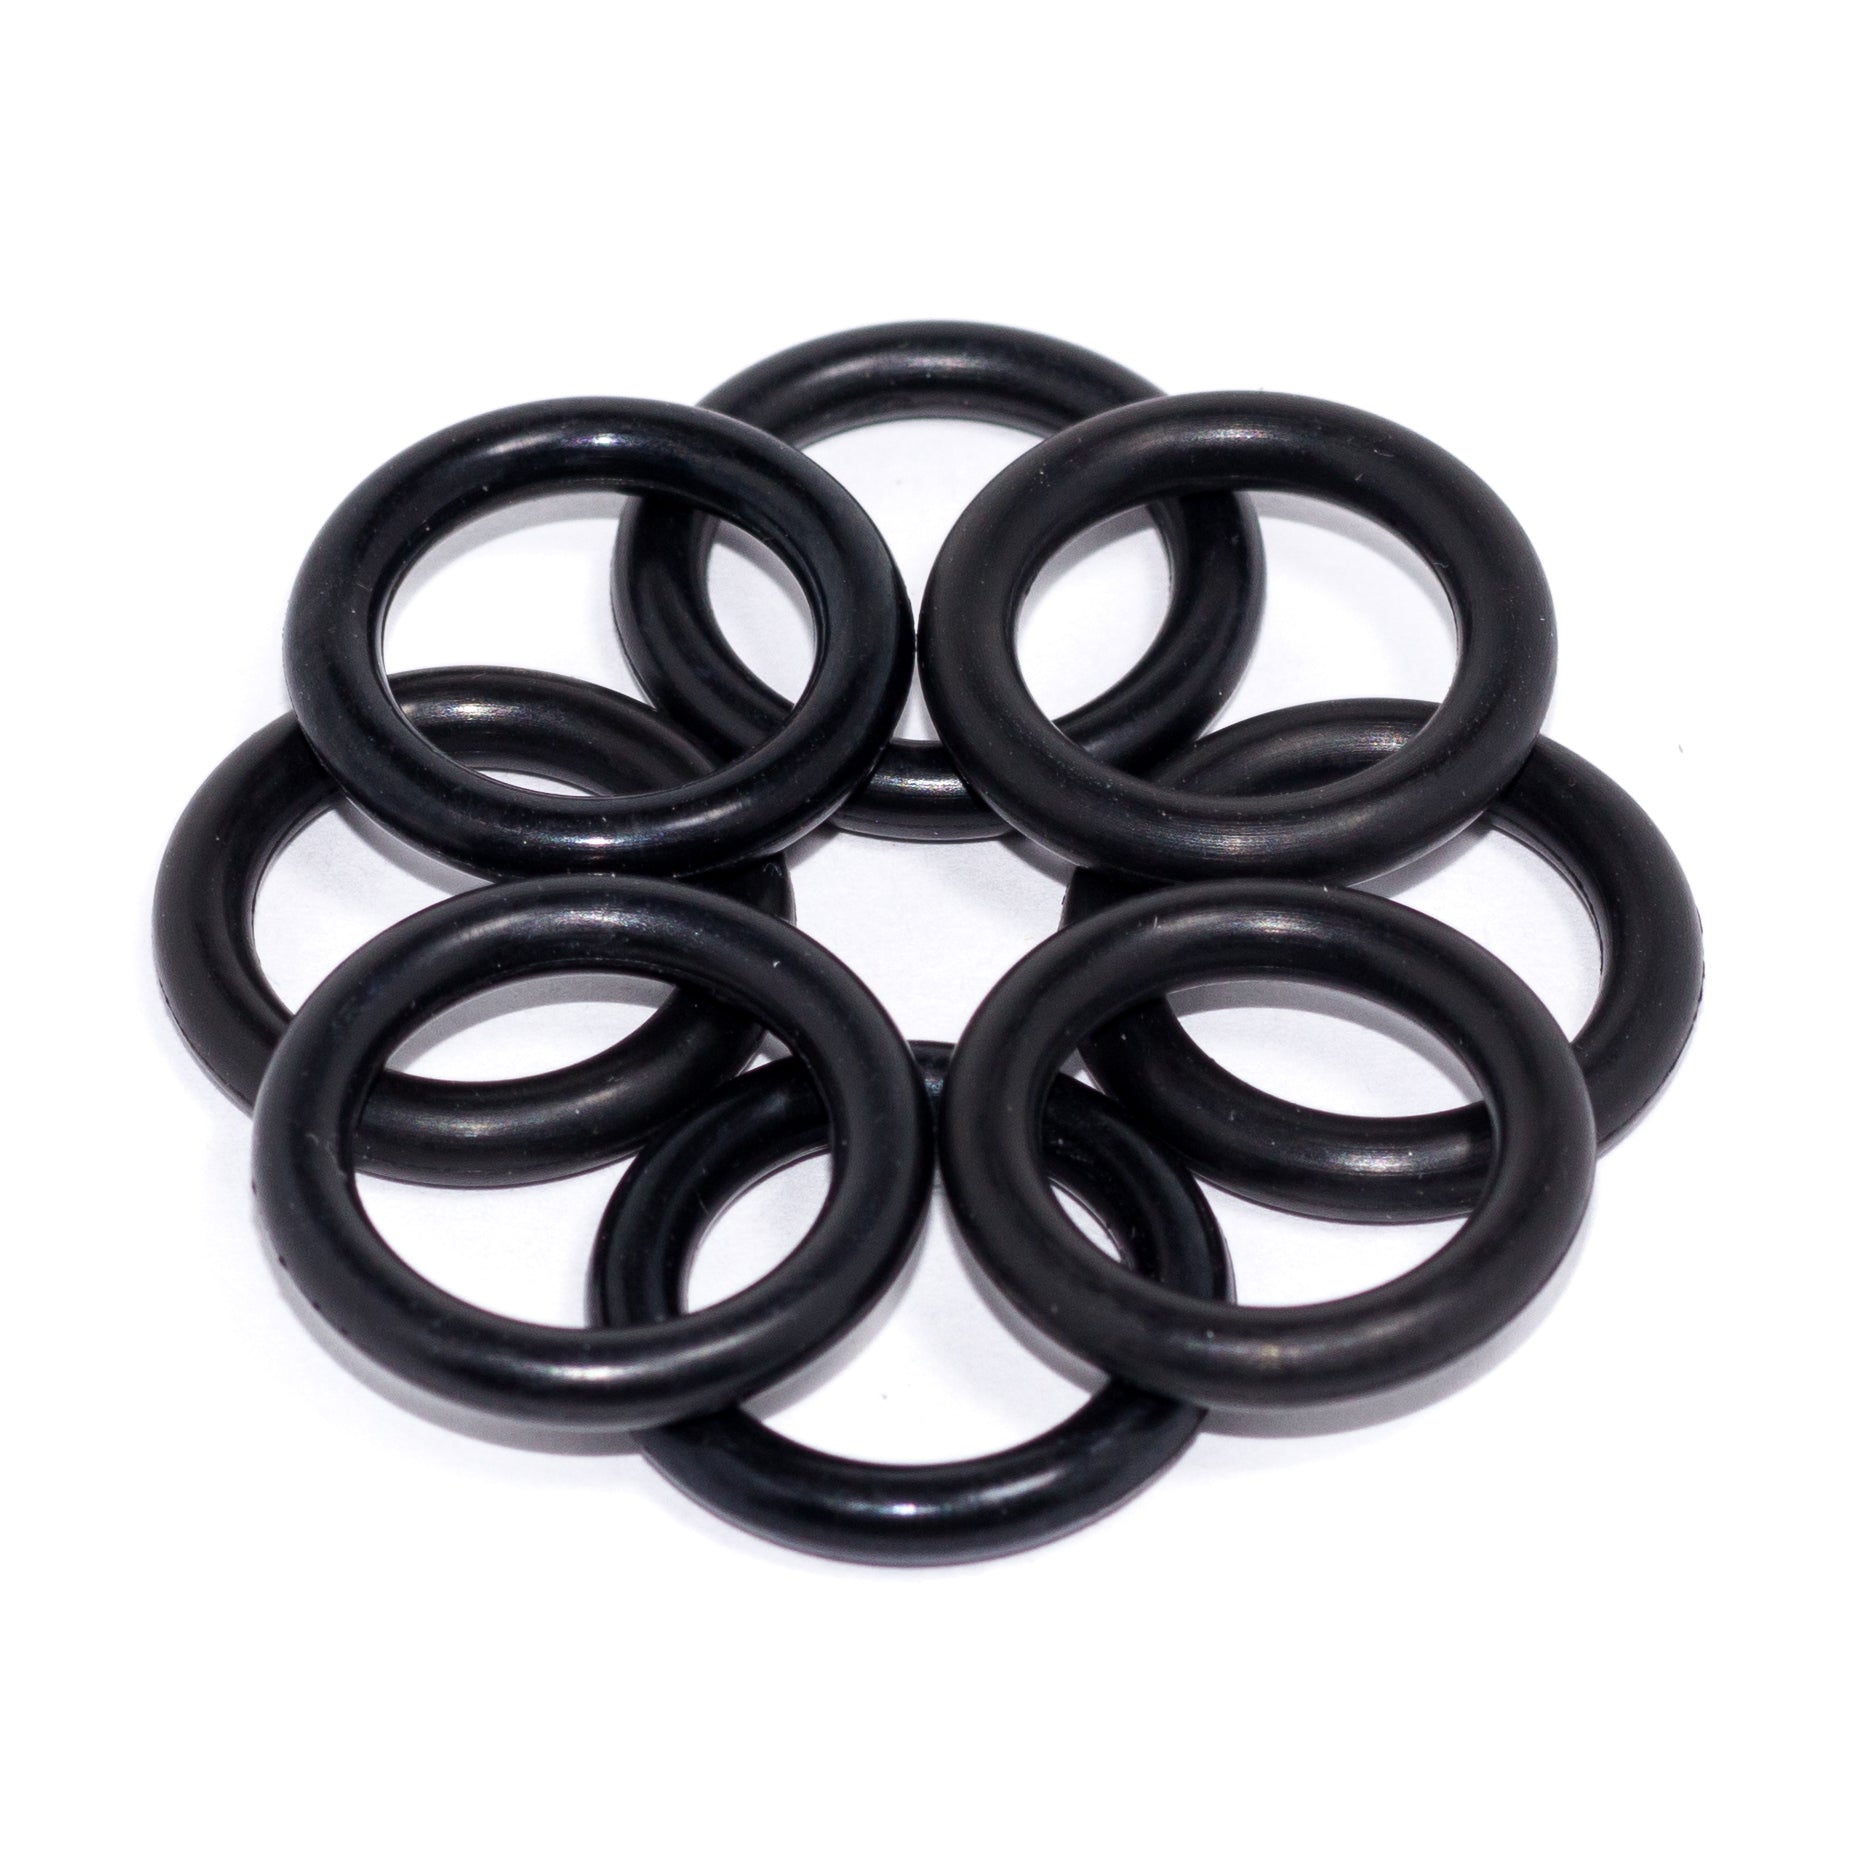 O-Rings for Bait Mold Injectors – Authentic Handmade